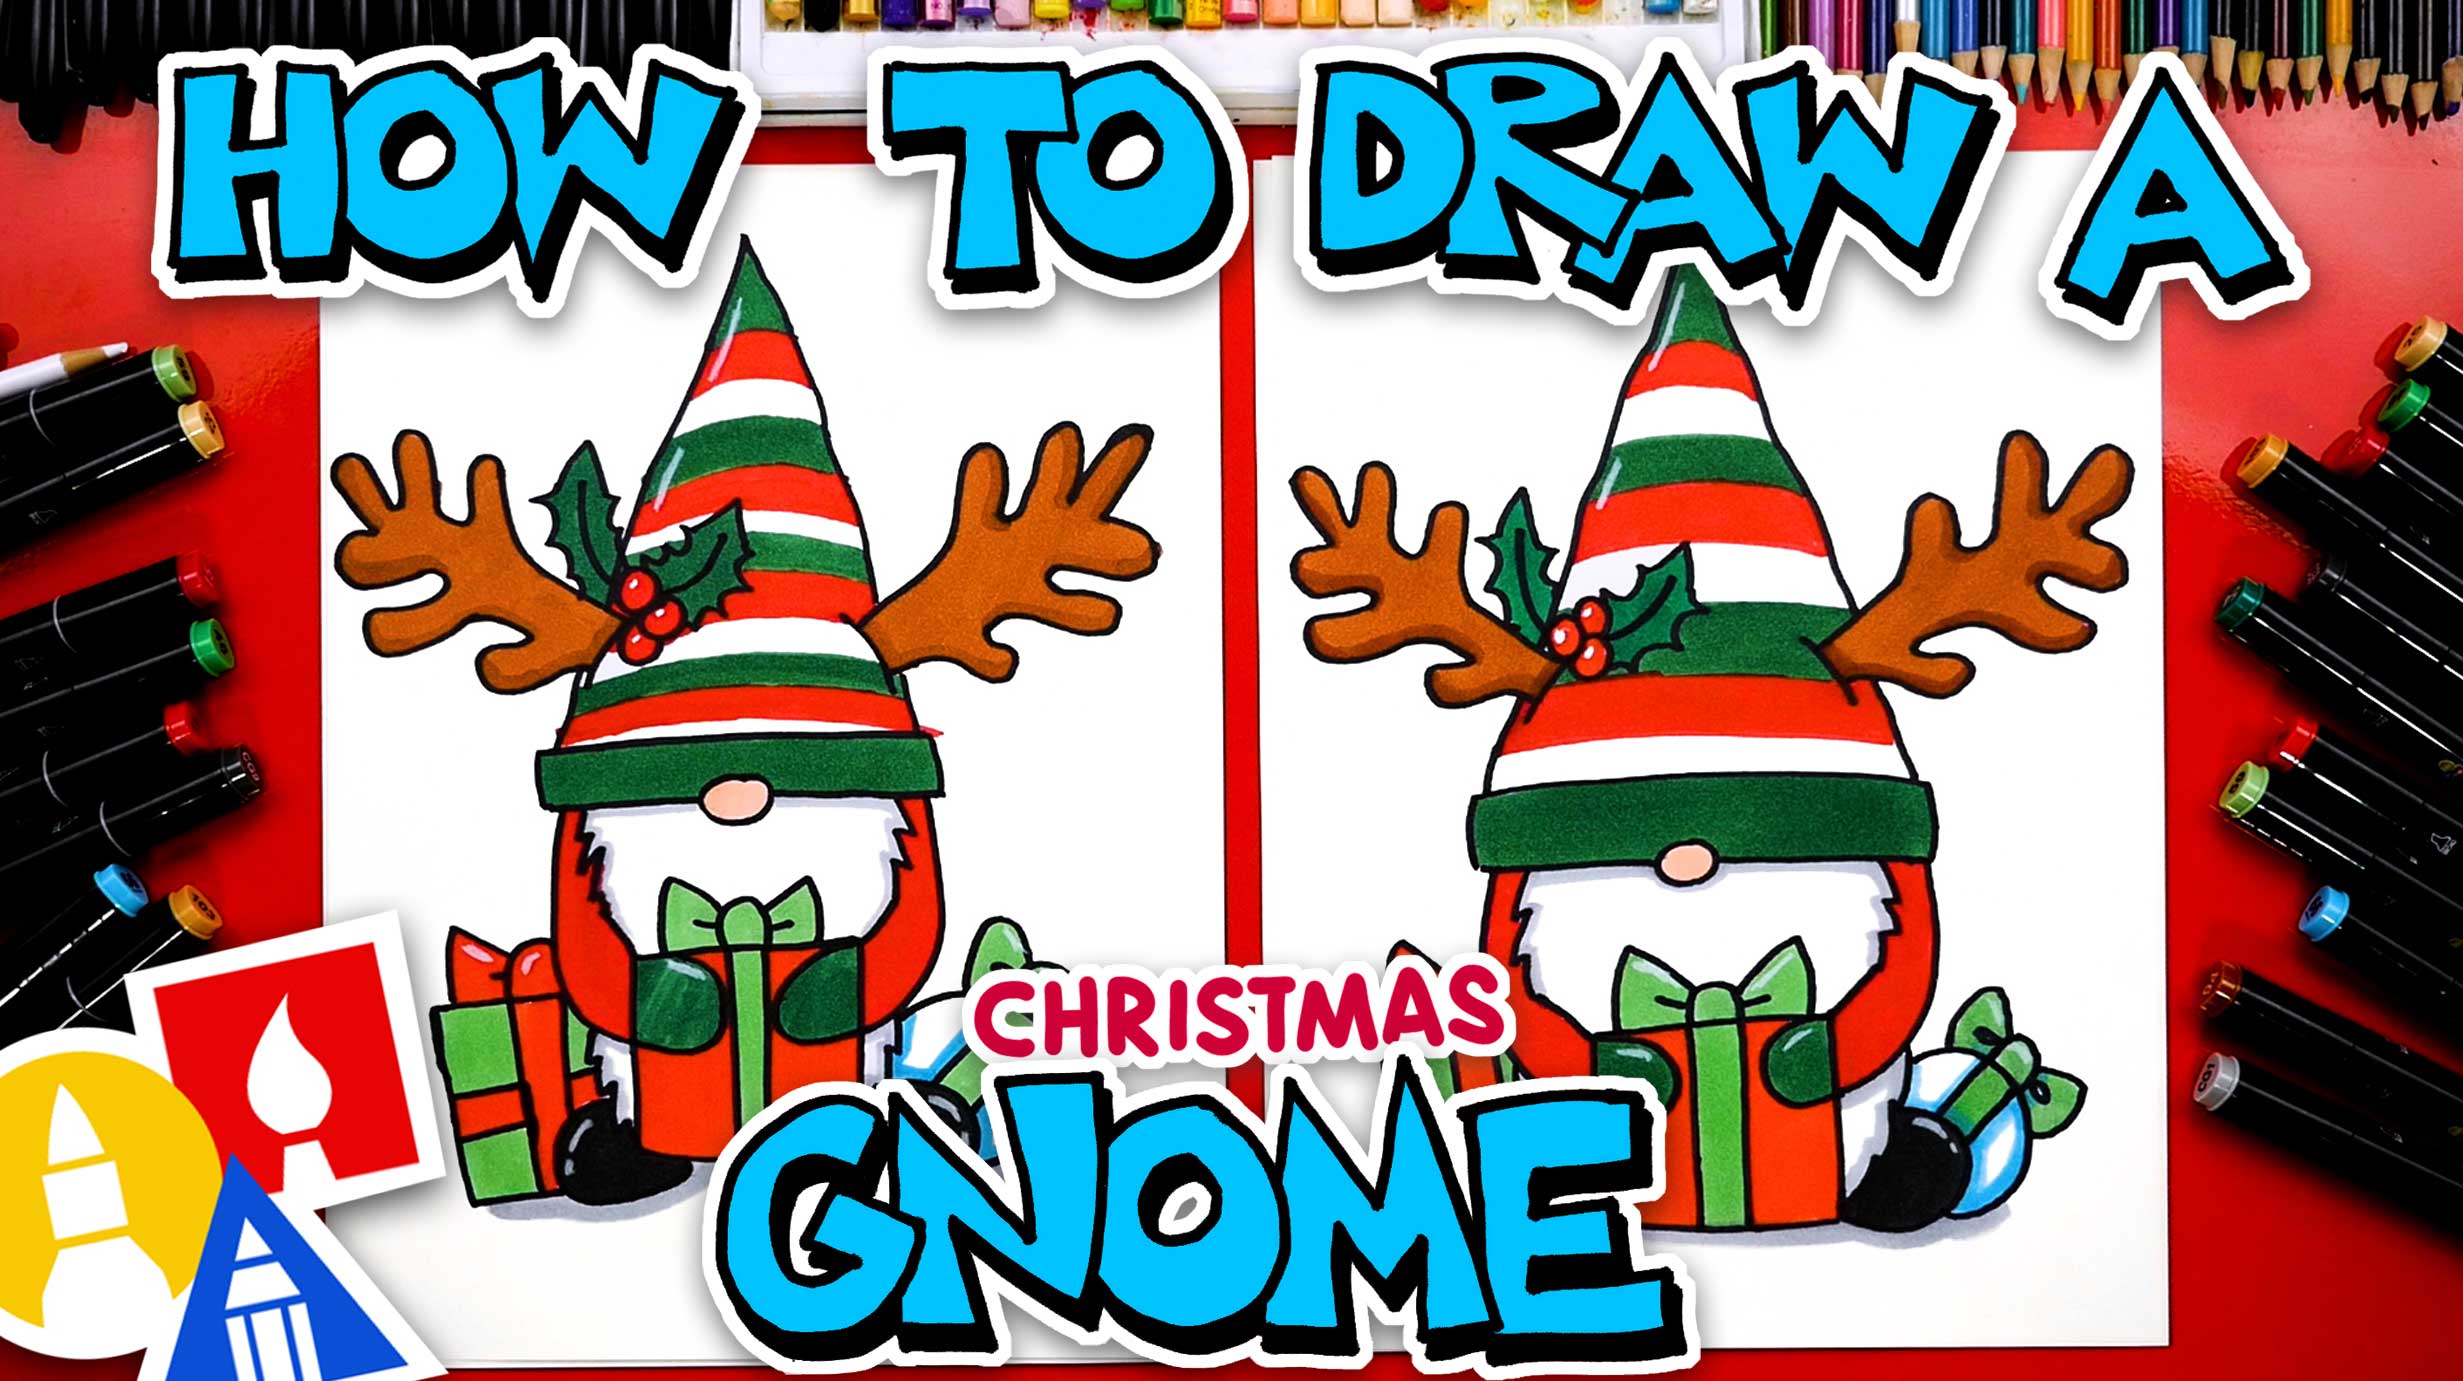 How To Draw A Christmas Gnome Art For Kids Hub